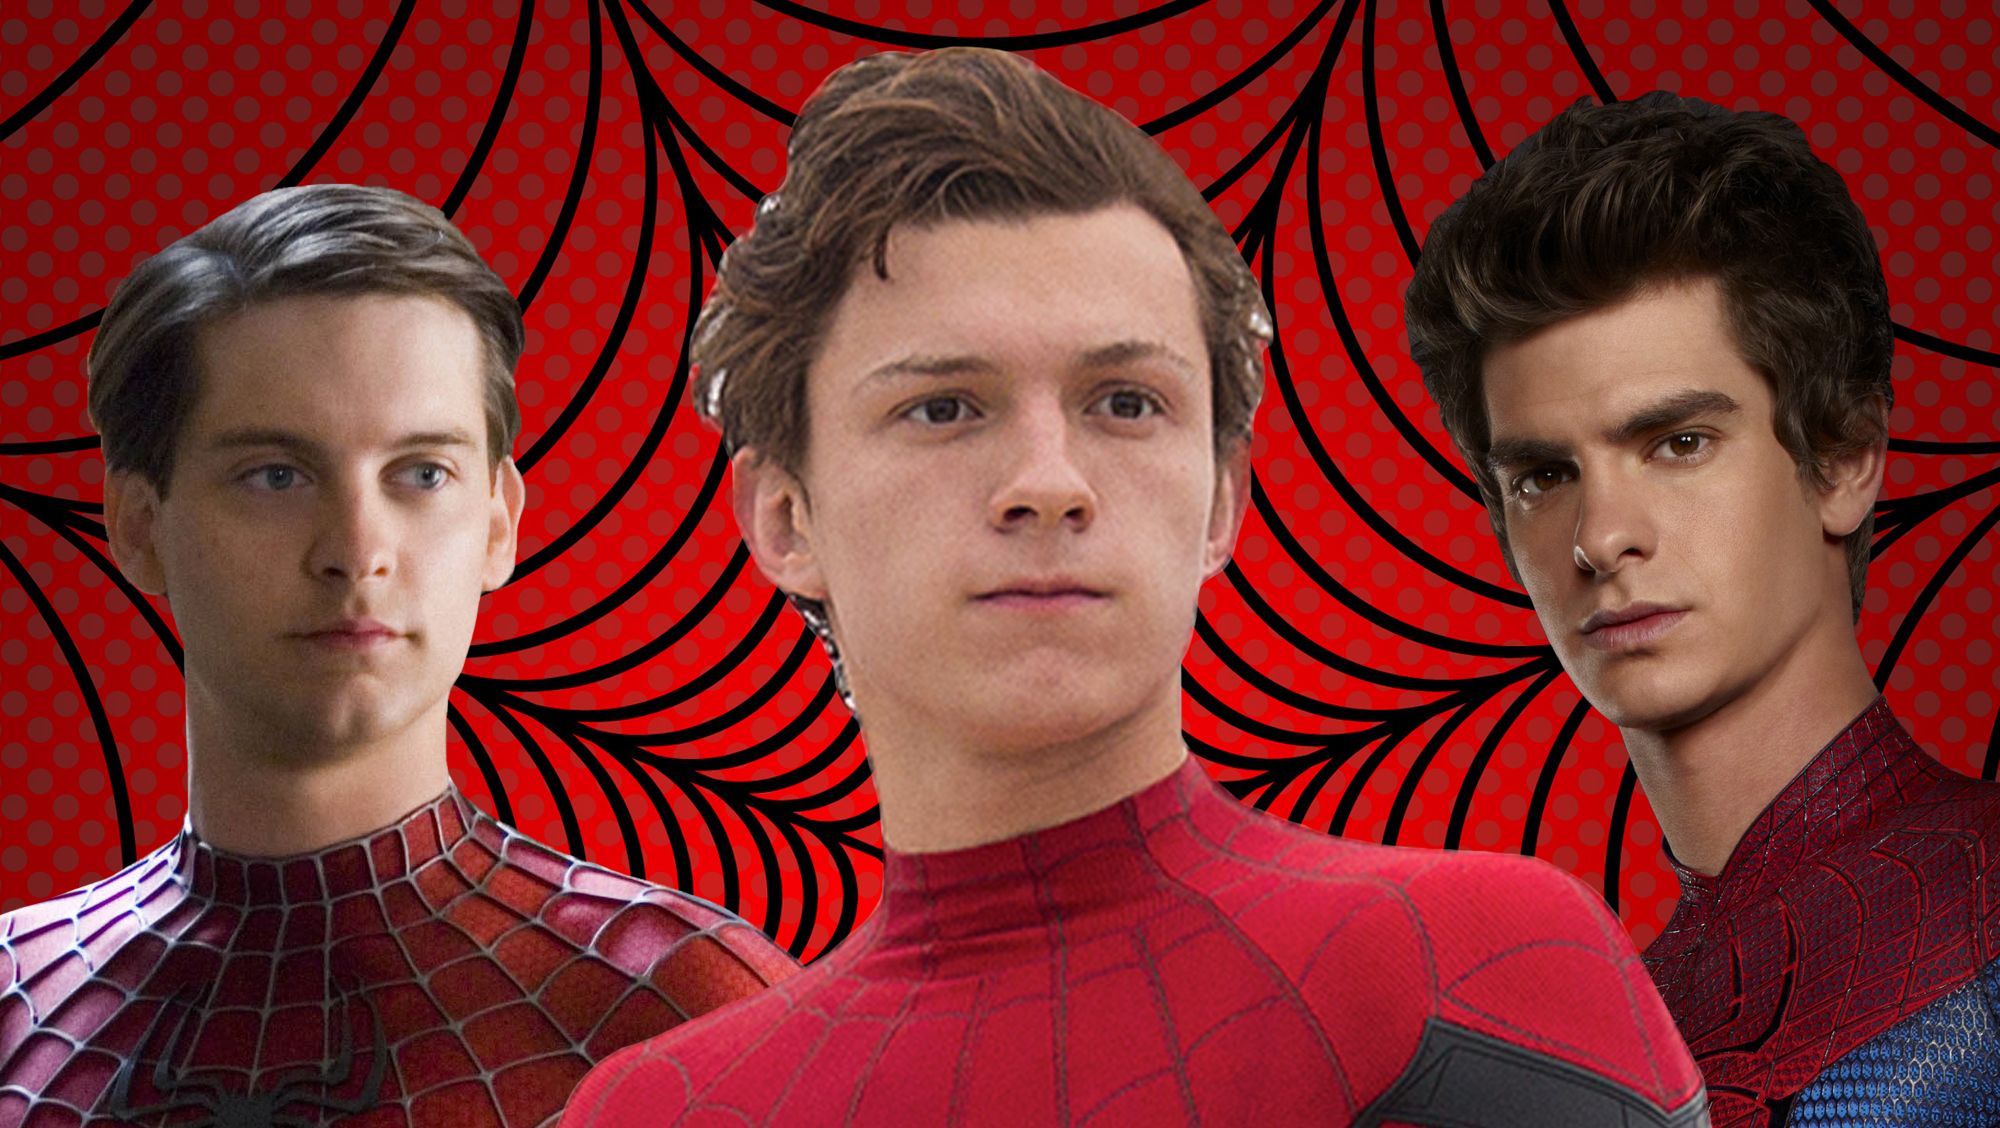 Tobey Maguire Explains What's So Special About His New Spider-Man